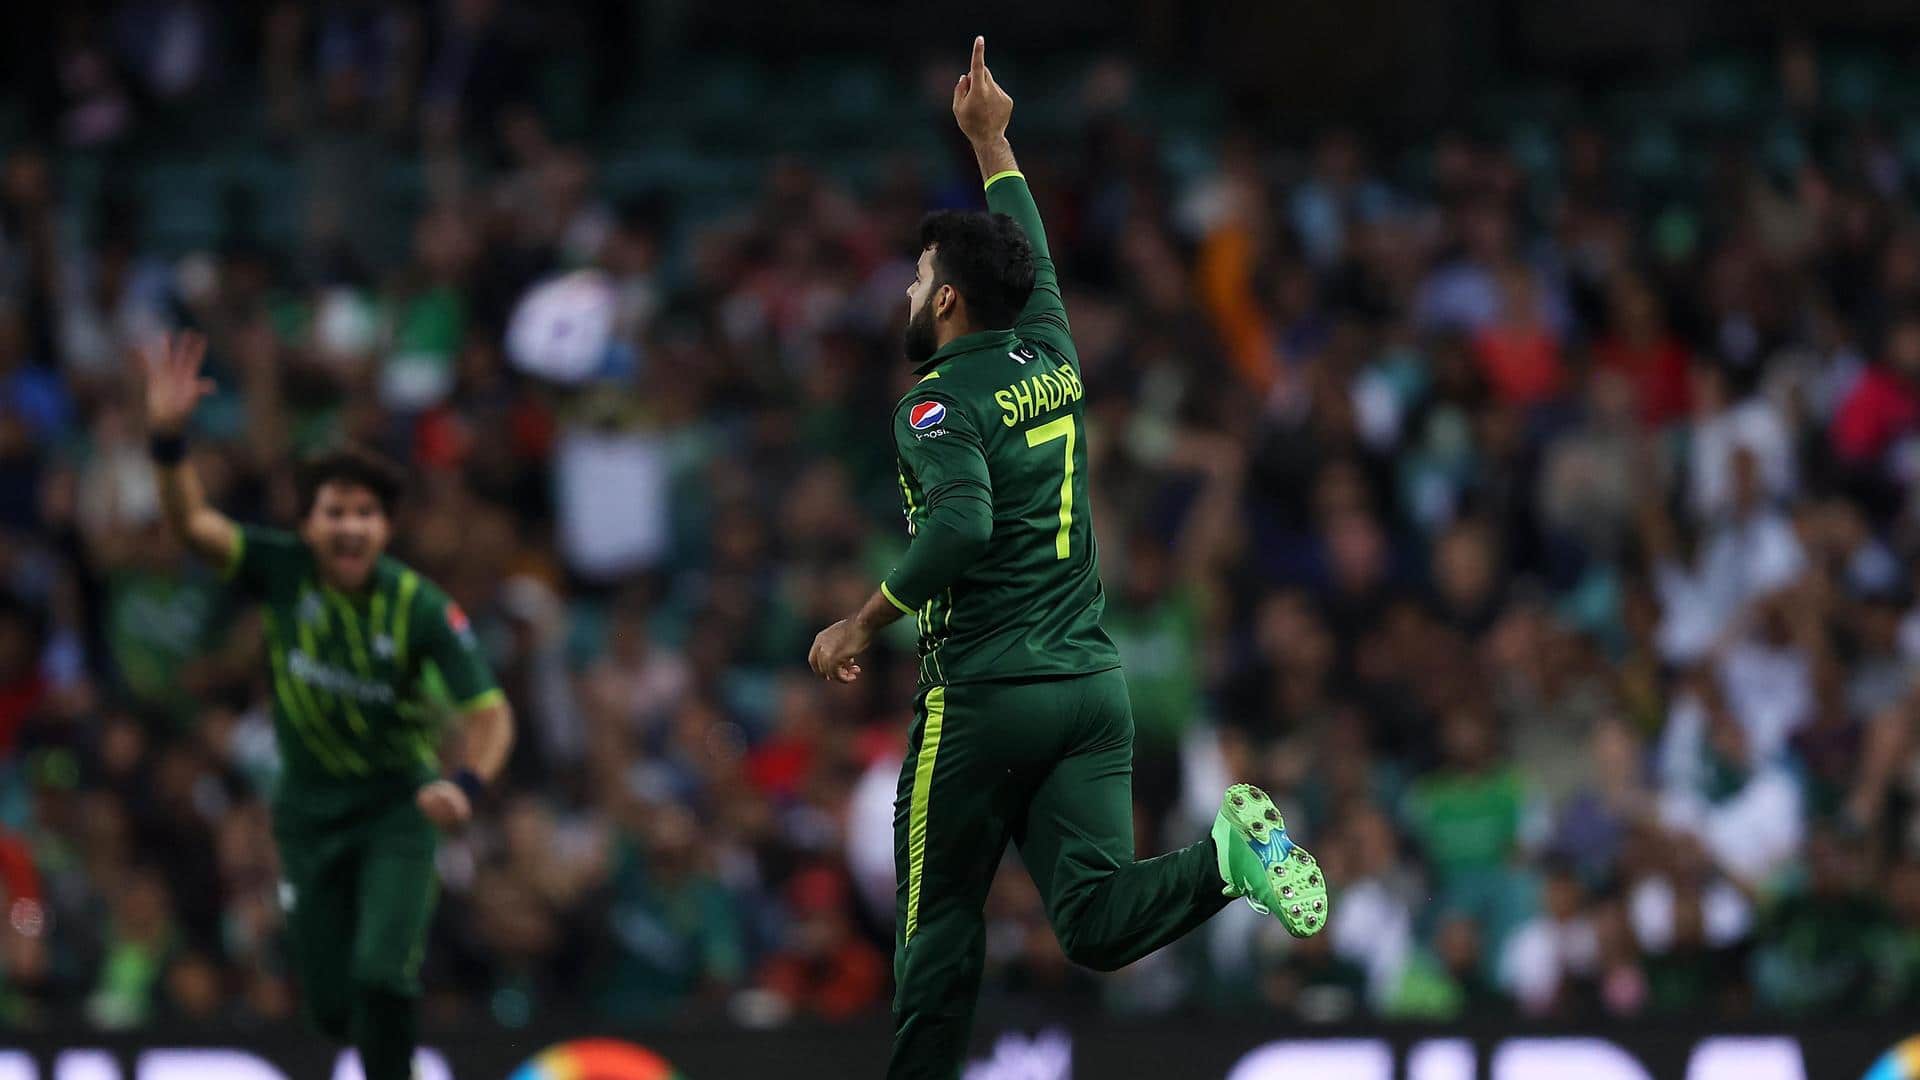 Shadab Khan becomes Pakistan's highest wicket-taker in T20Is: Details here